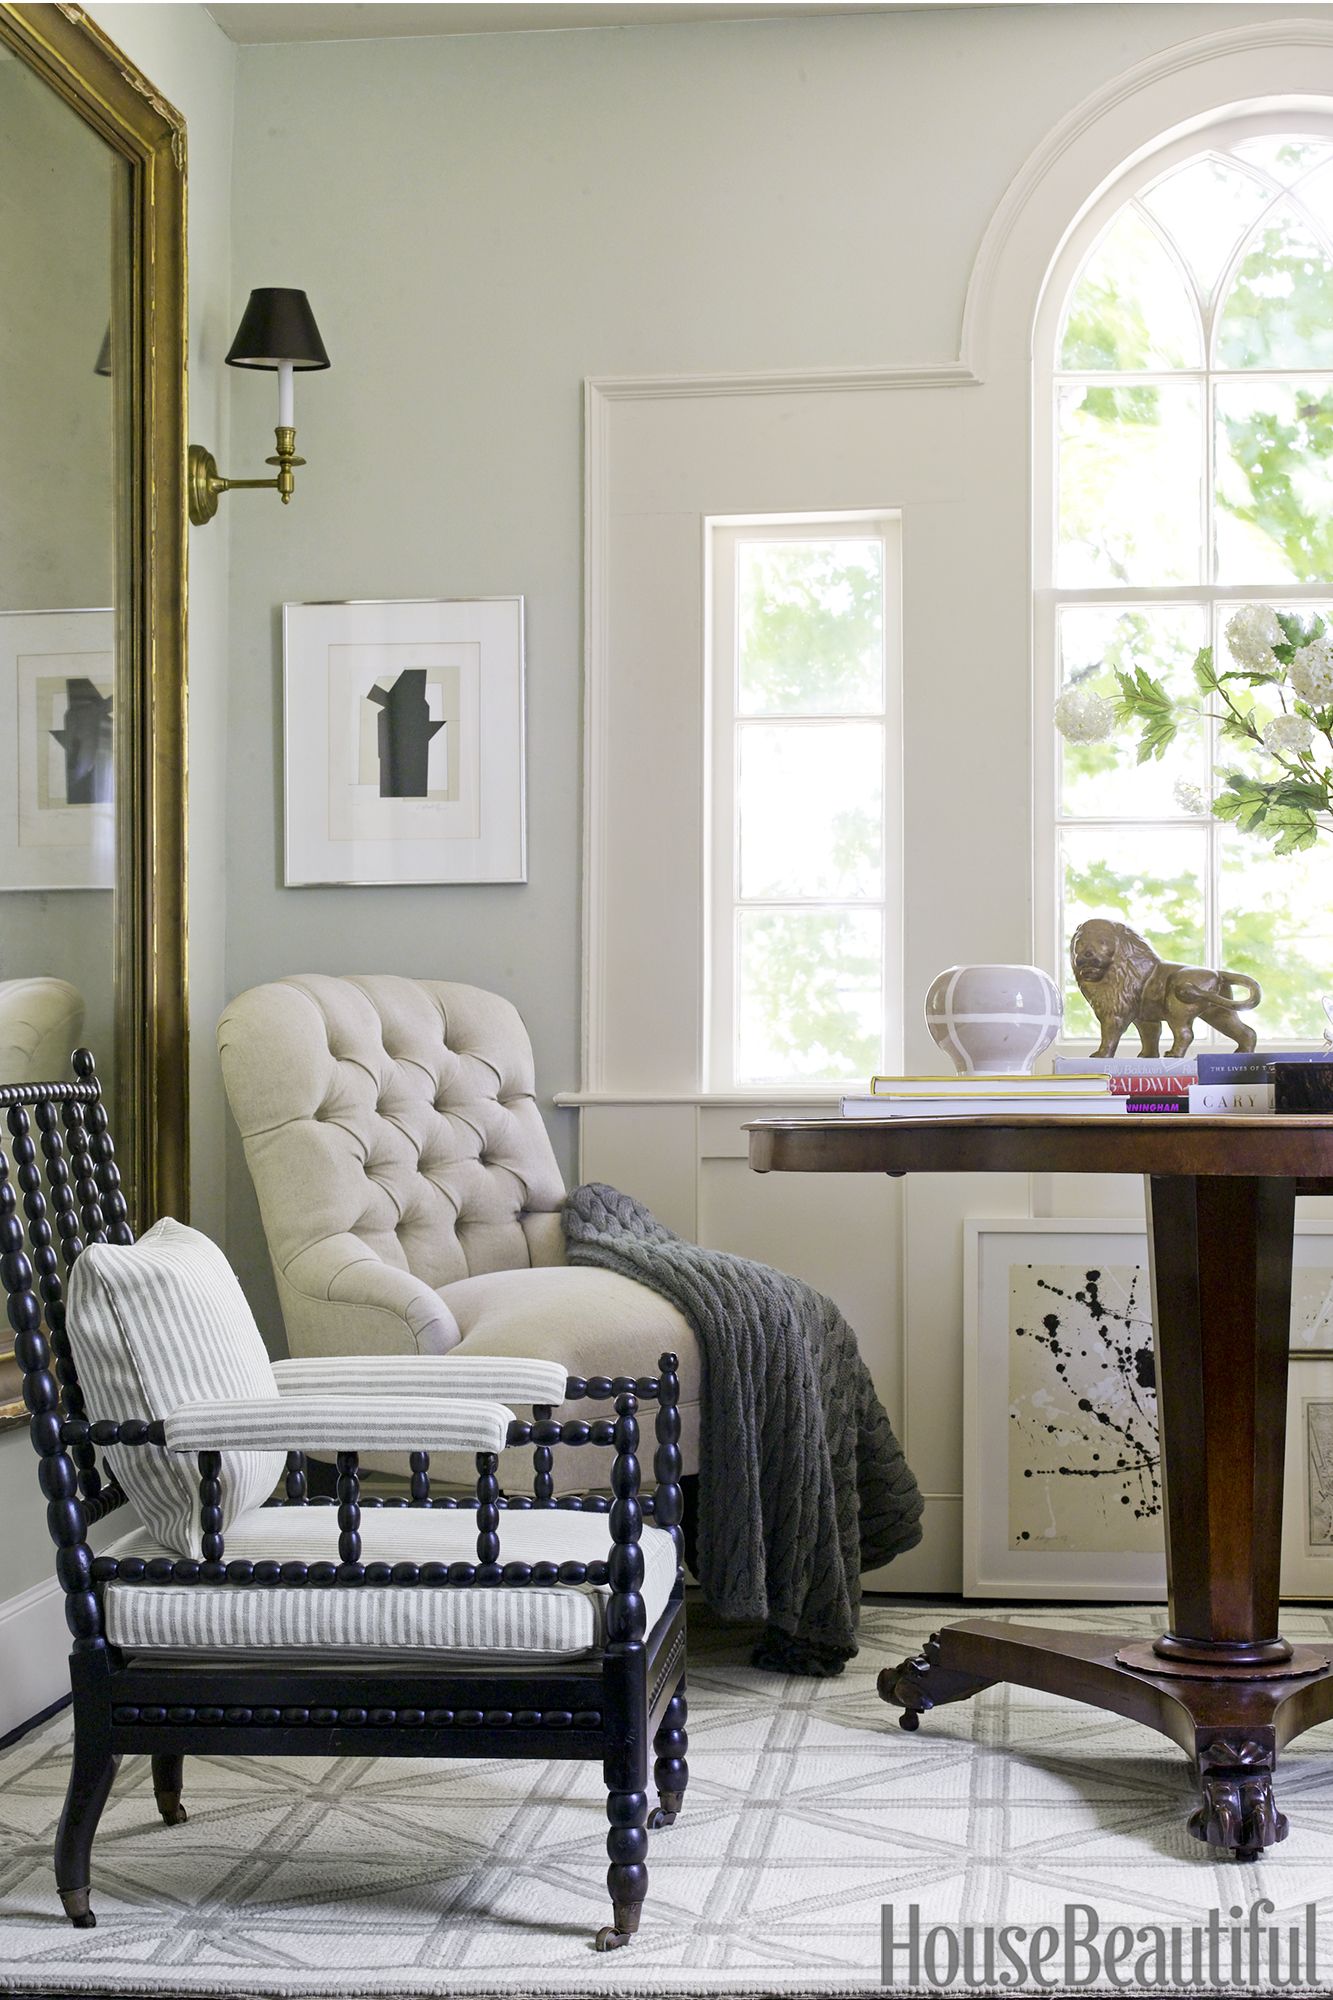 10 Sage Green Paint Colors That Bring Peace And Calm Best